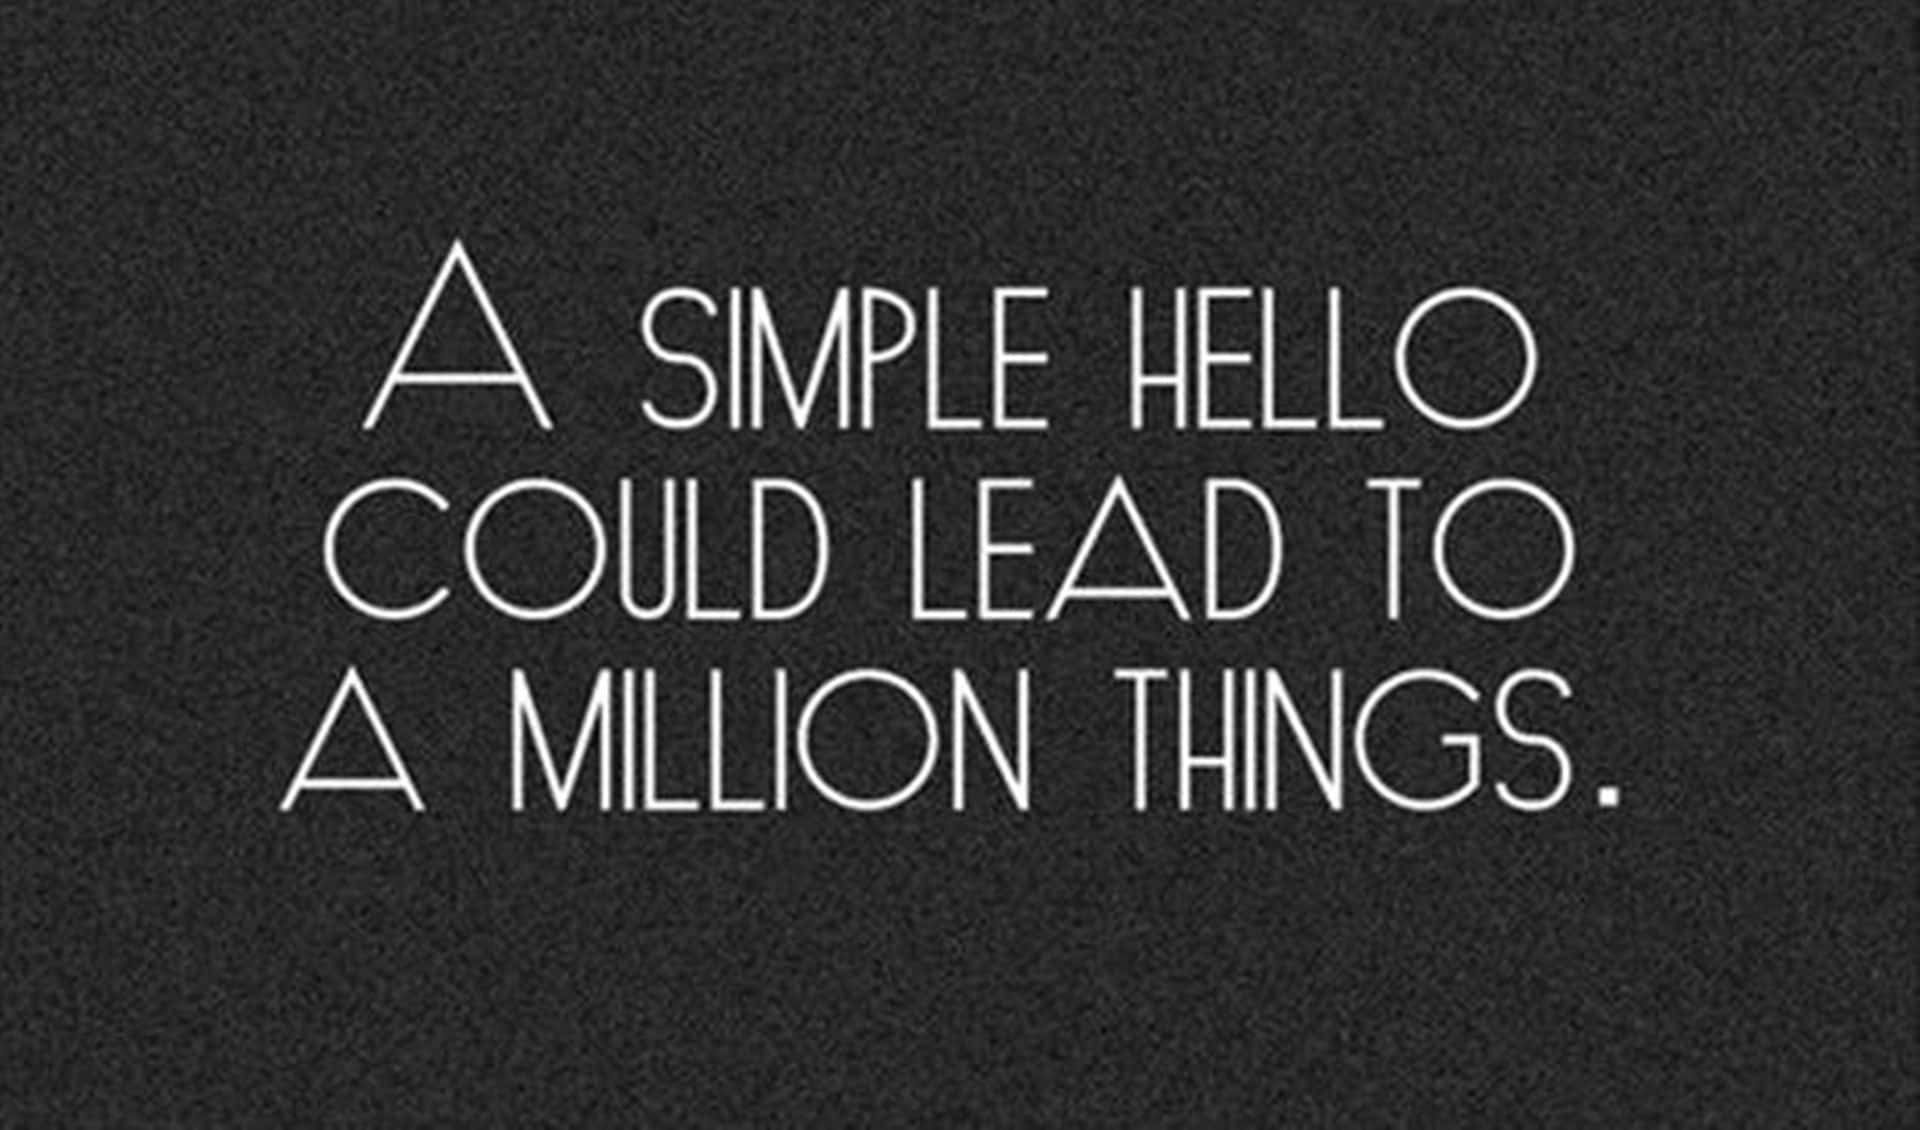 A Simple Hello Could Lead To A Million Things